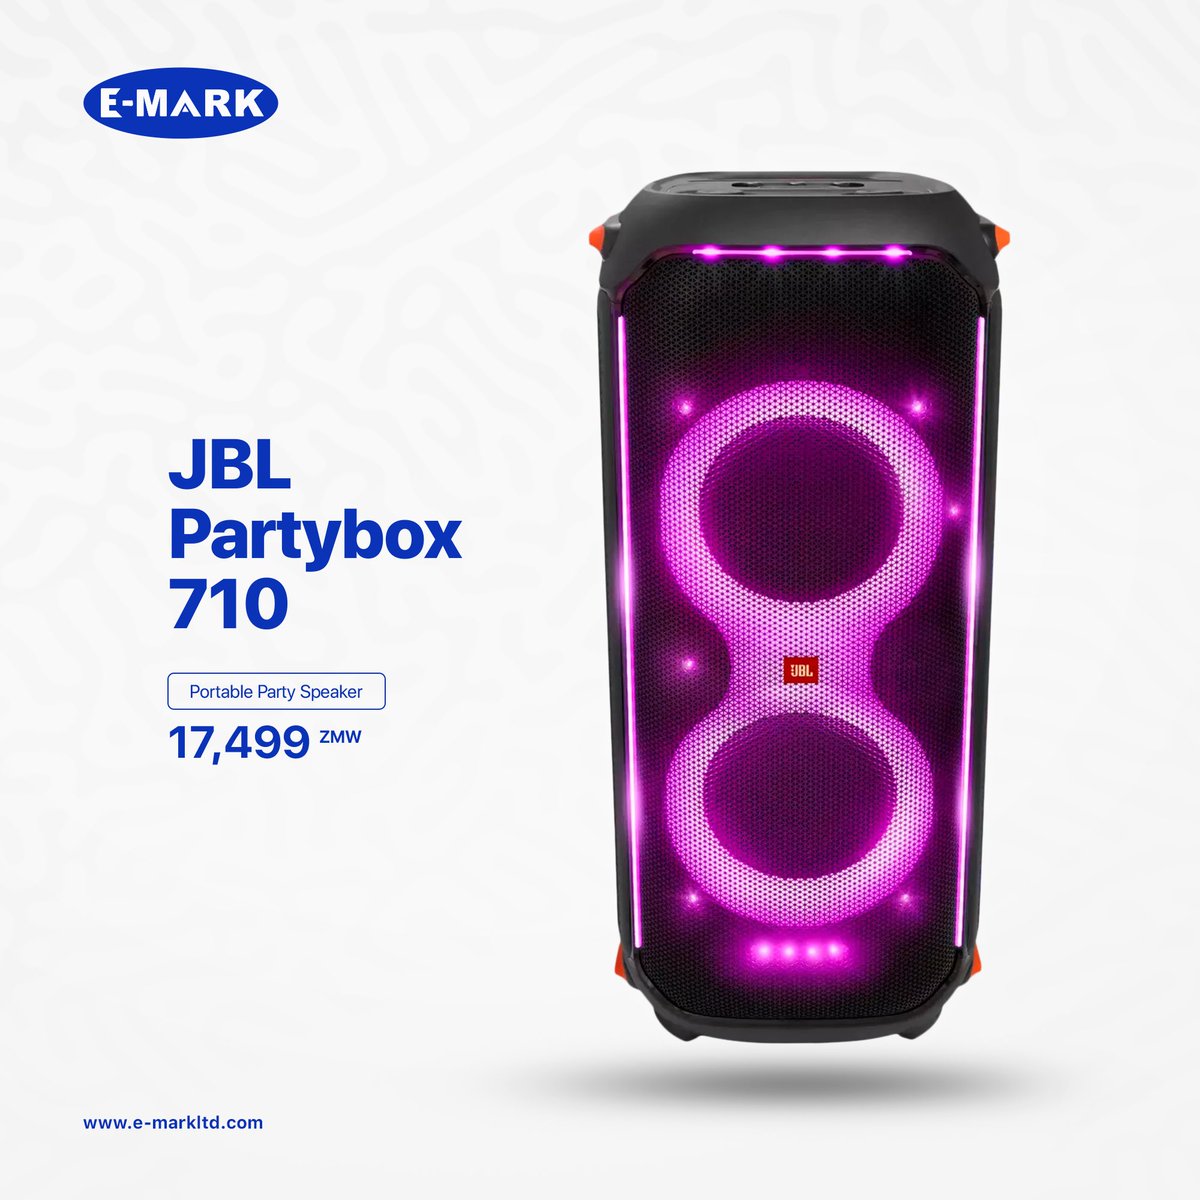 The JBL Partybox 710 is the ultimate party machine, unleash the ultimate party experience with 800W of powerful sound. #JBL #Partybox710 #ConnectingPeople